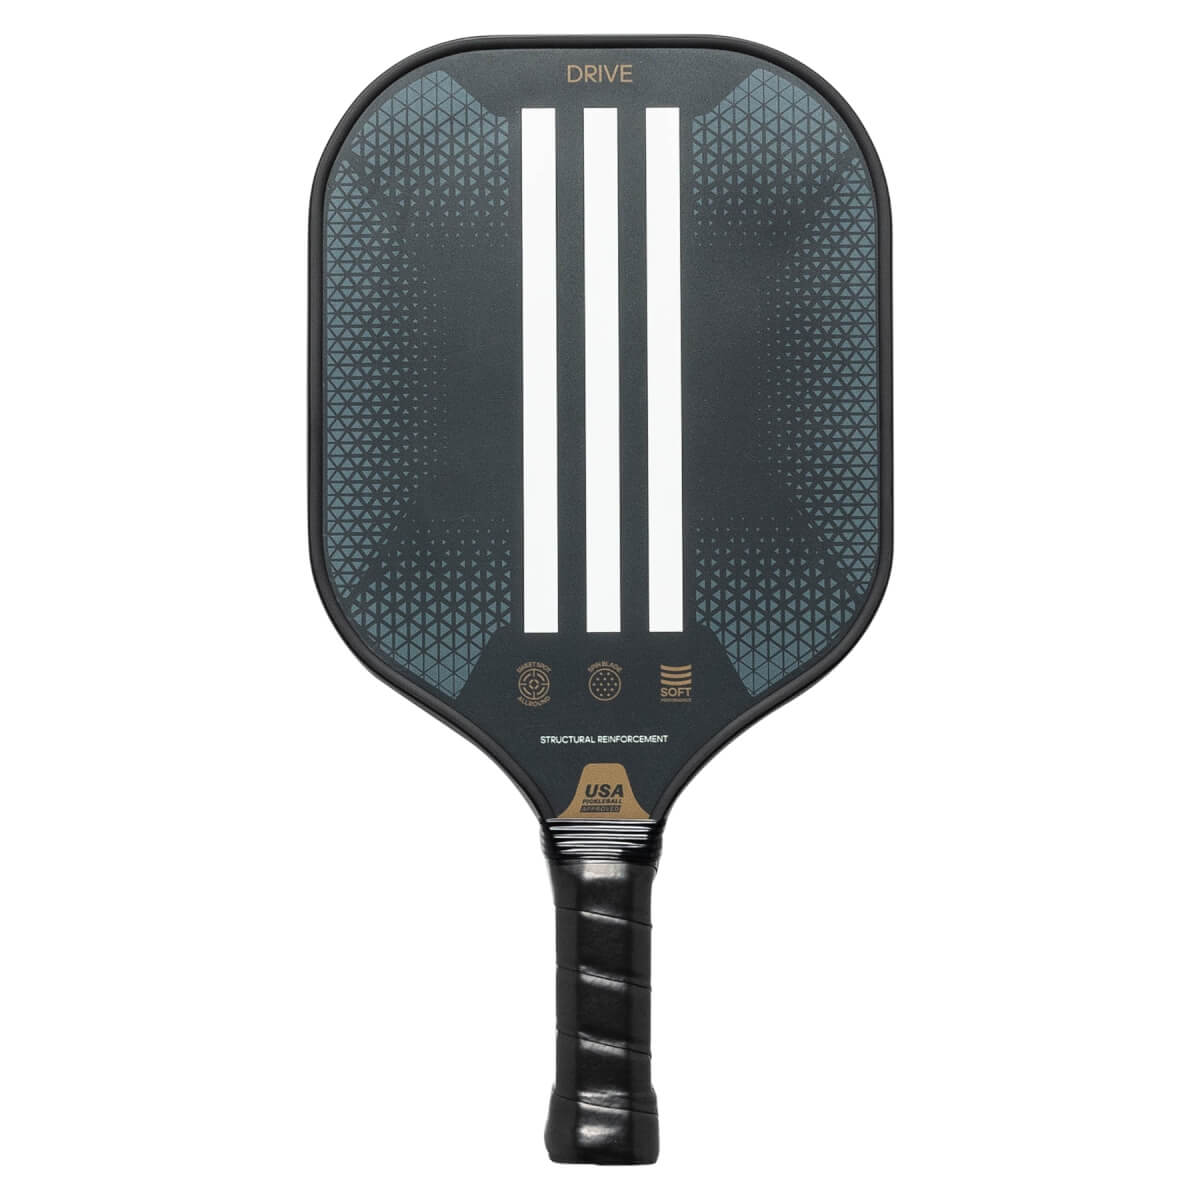 Adidas Drive 2 Paddle in black with white stripes